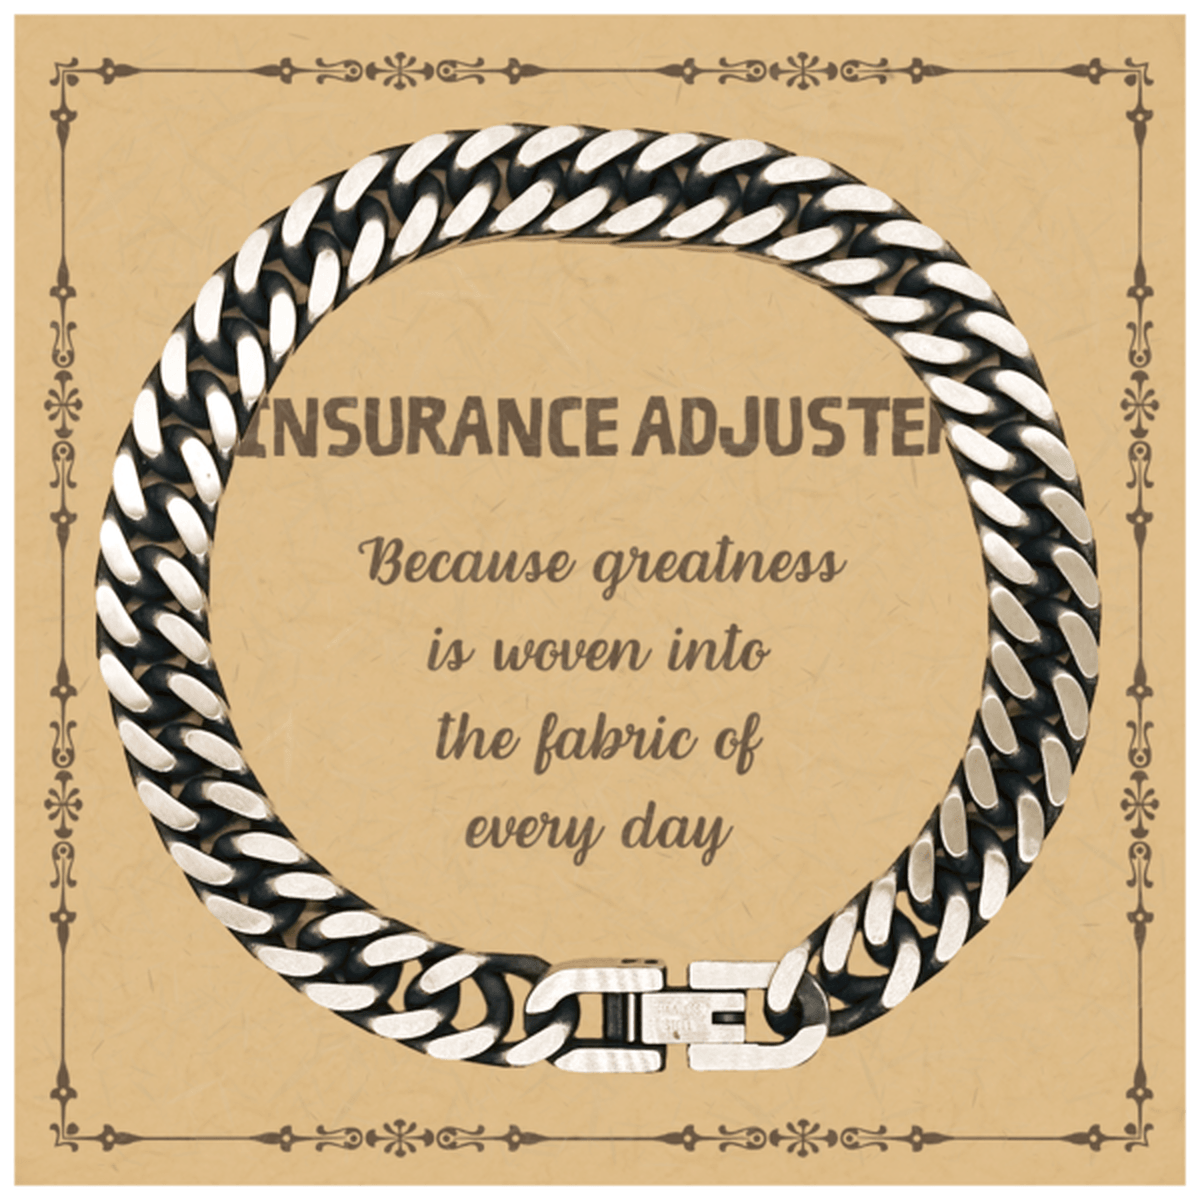 Sarcastic Insurance Adjuster Cuban Link Chain Bracelet Gifts, Christmas Holiday Gifts for Insurance Adjuster Birthday Message Card, Insurance Adjuster: Because greatness is woven into the fabric of every day, Coworkers, Friends - Mallard Moon Gift Shop